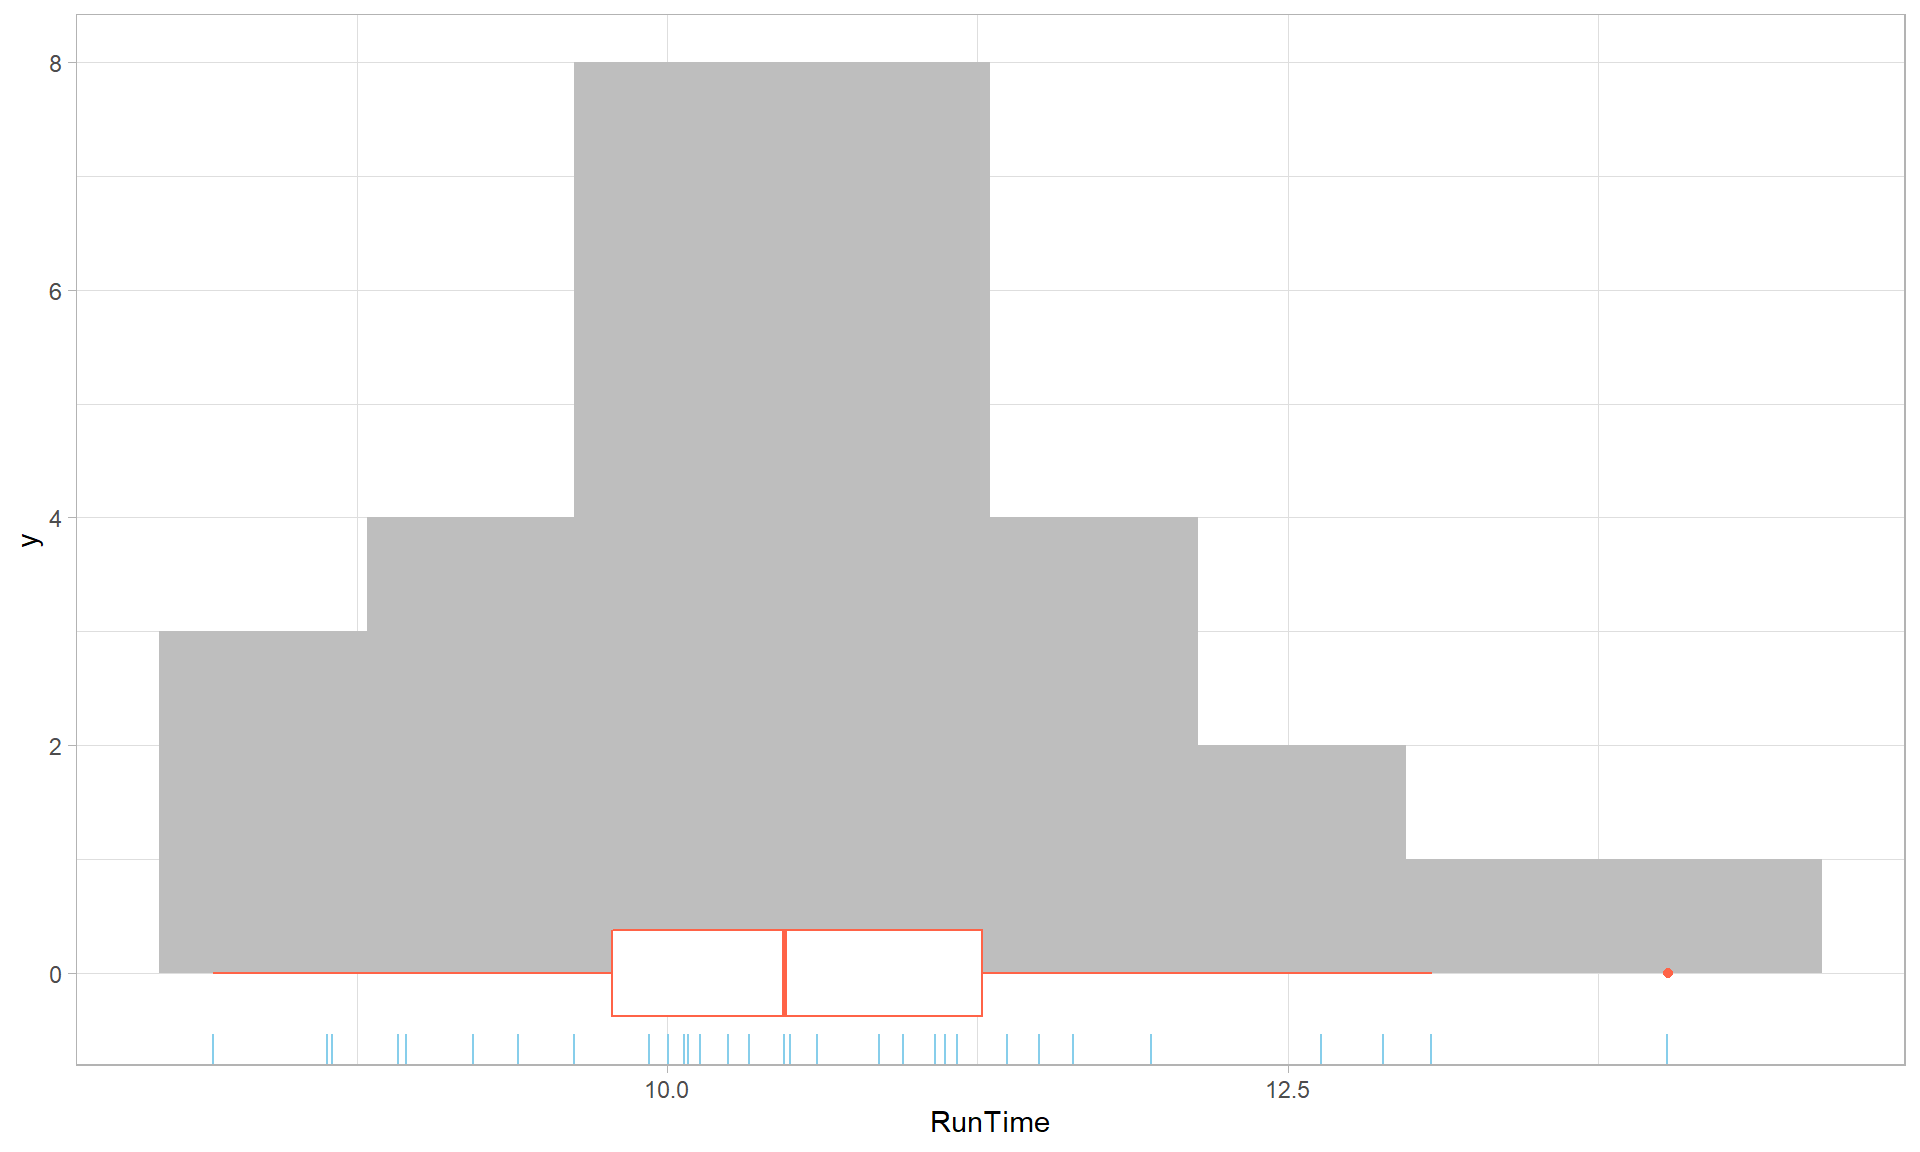 Histogram with boxplot and rug of Run Times using ggplot with modified colors and theme.